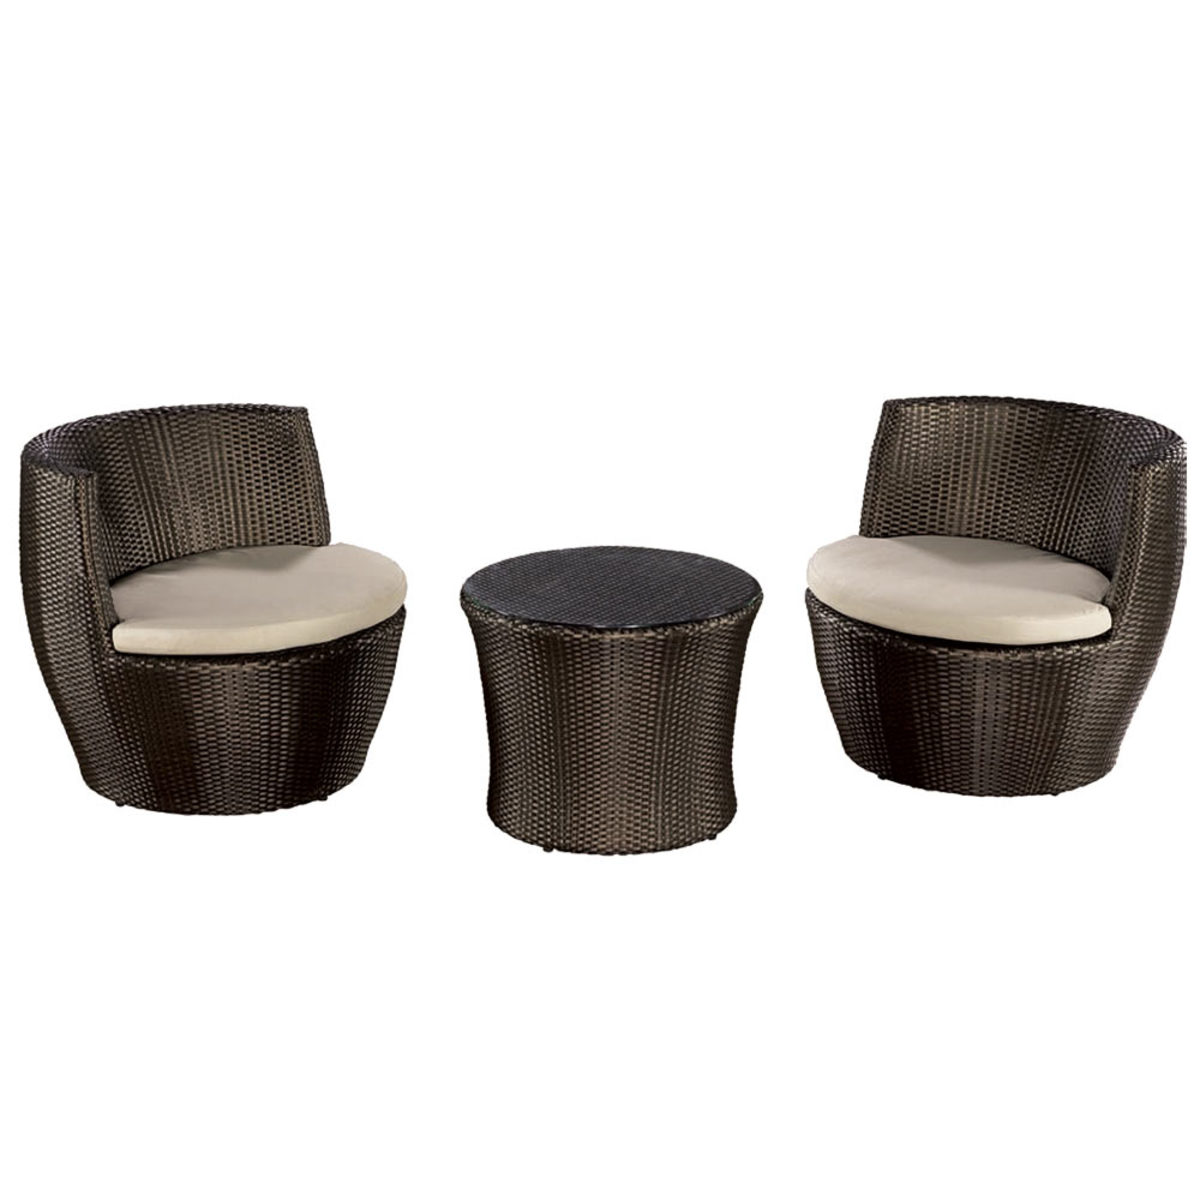 Akula Living Aegean Pod 3 Piece Table and Chairs Set